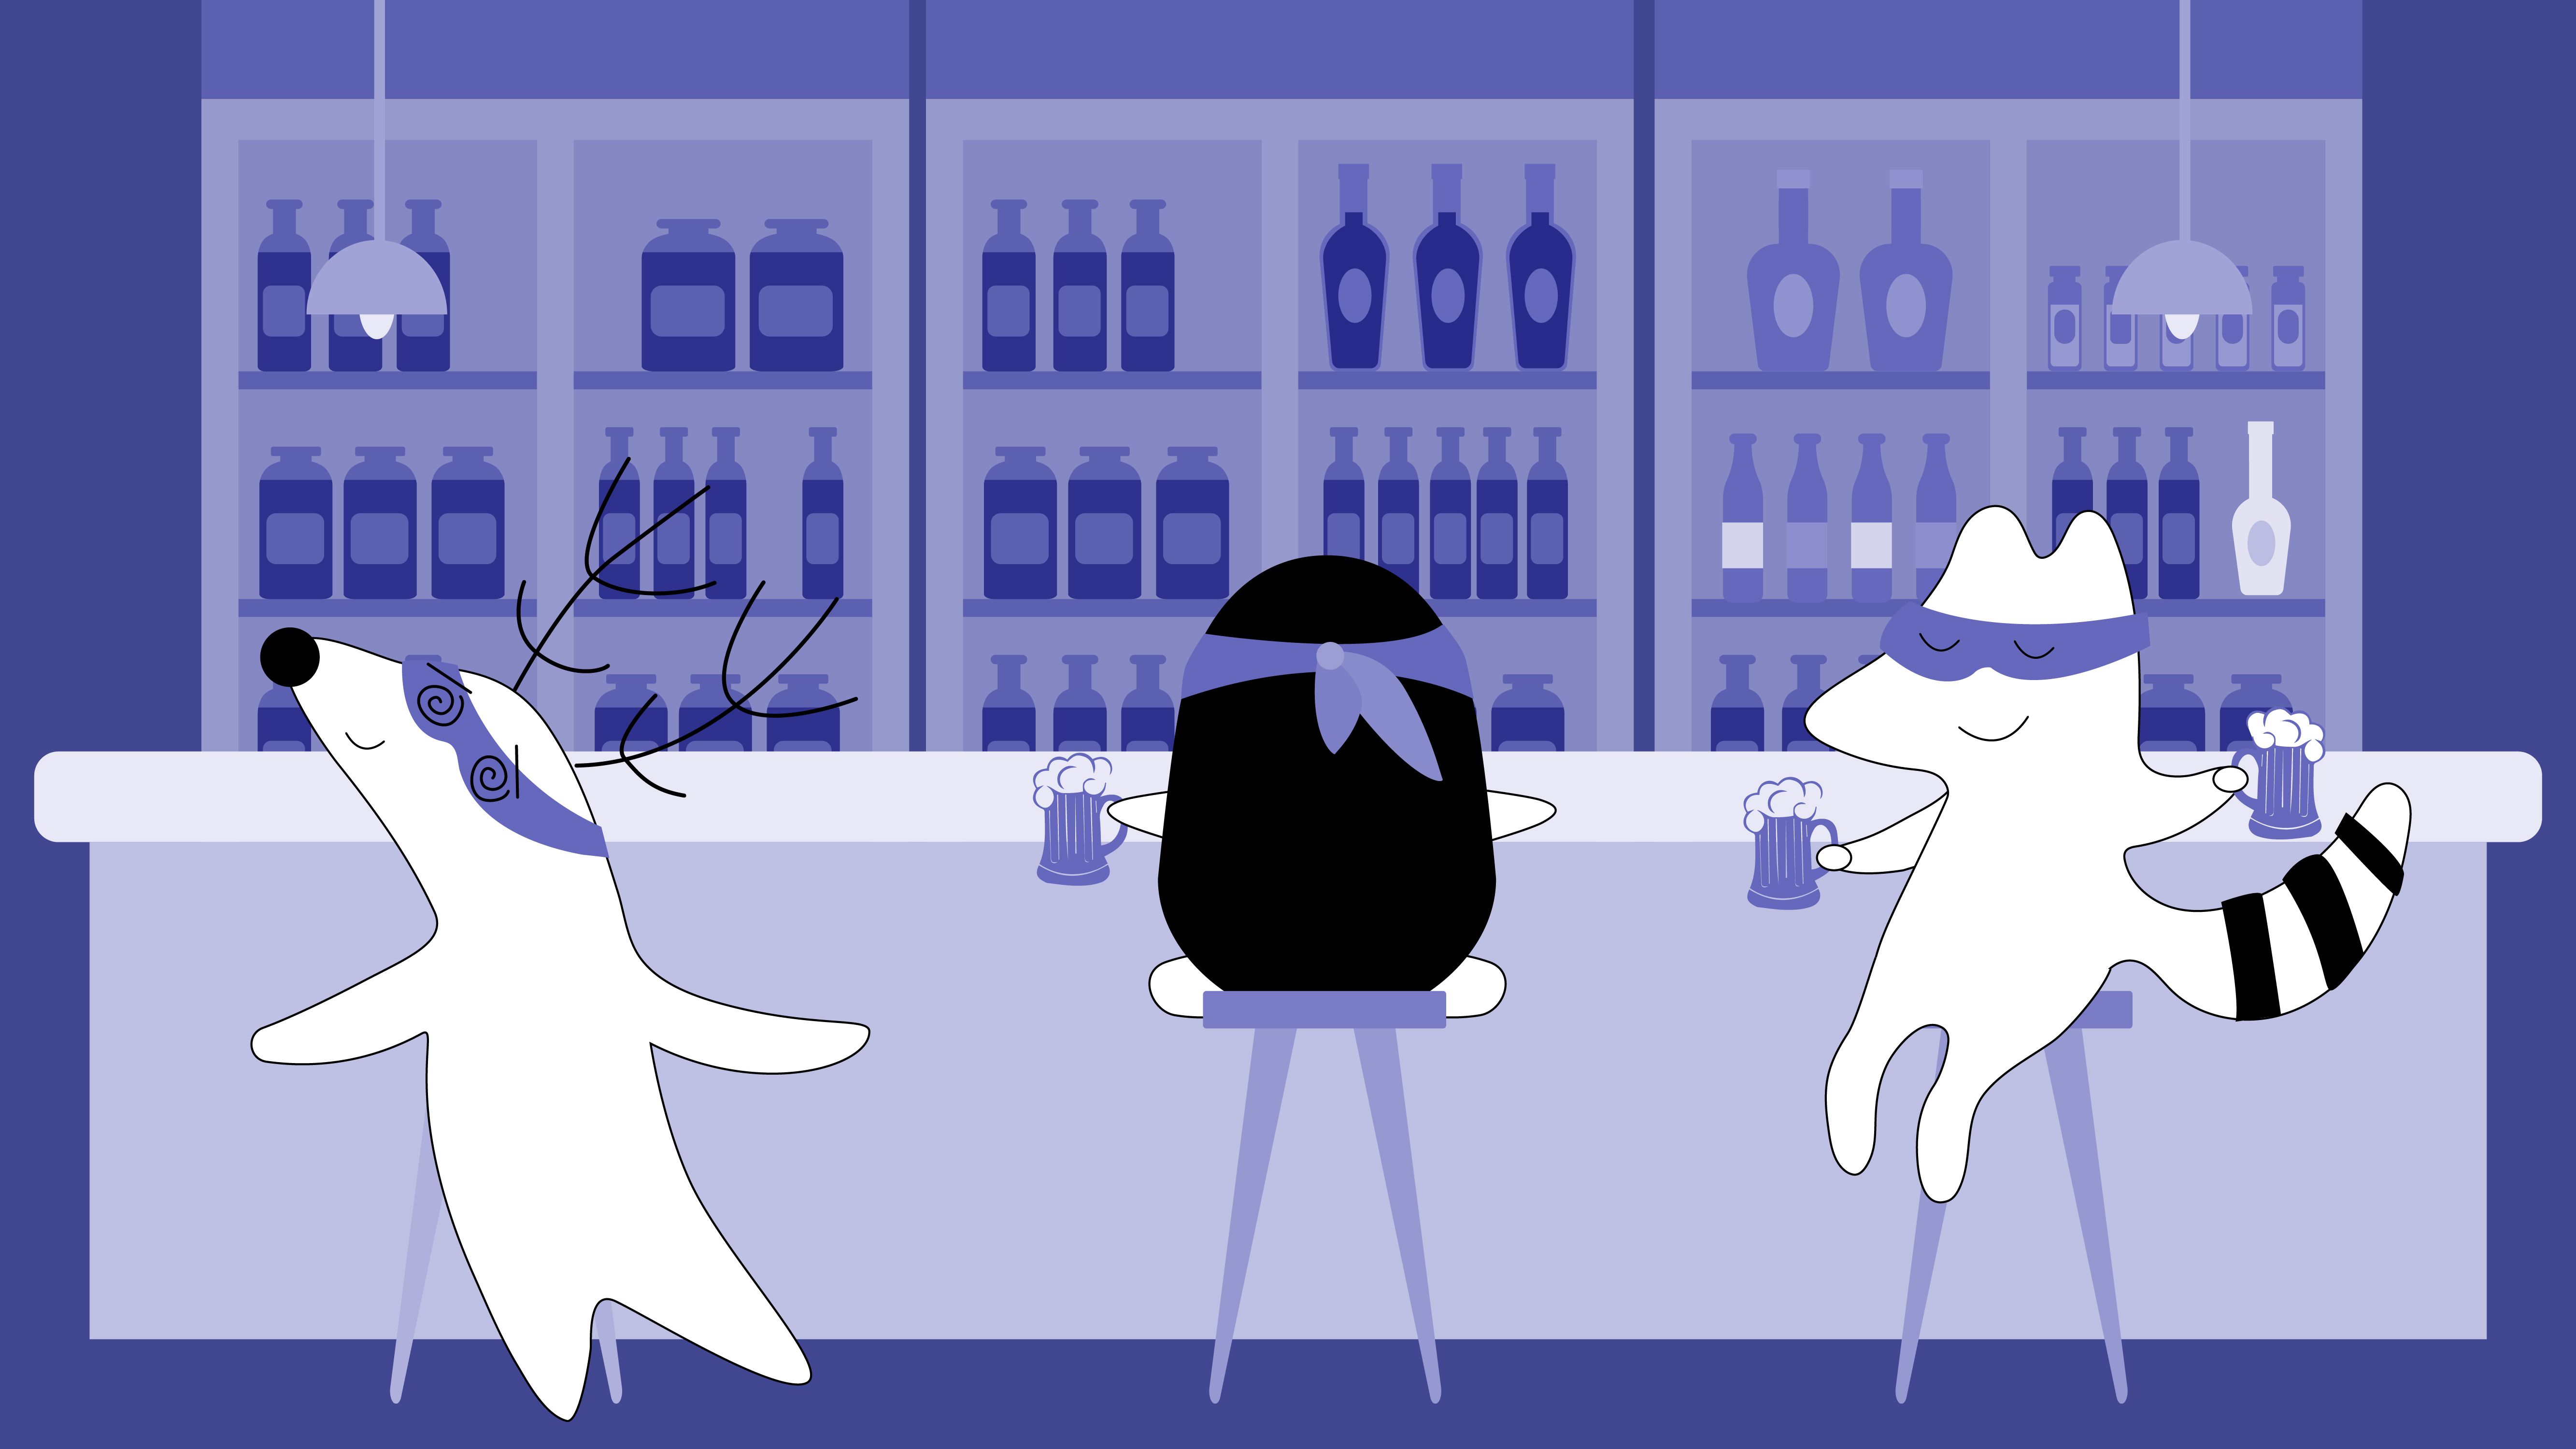 Soren, looking very drunk, leaves Iggy, Pocky, and Benji at the bar.